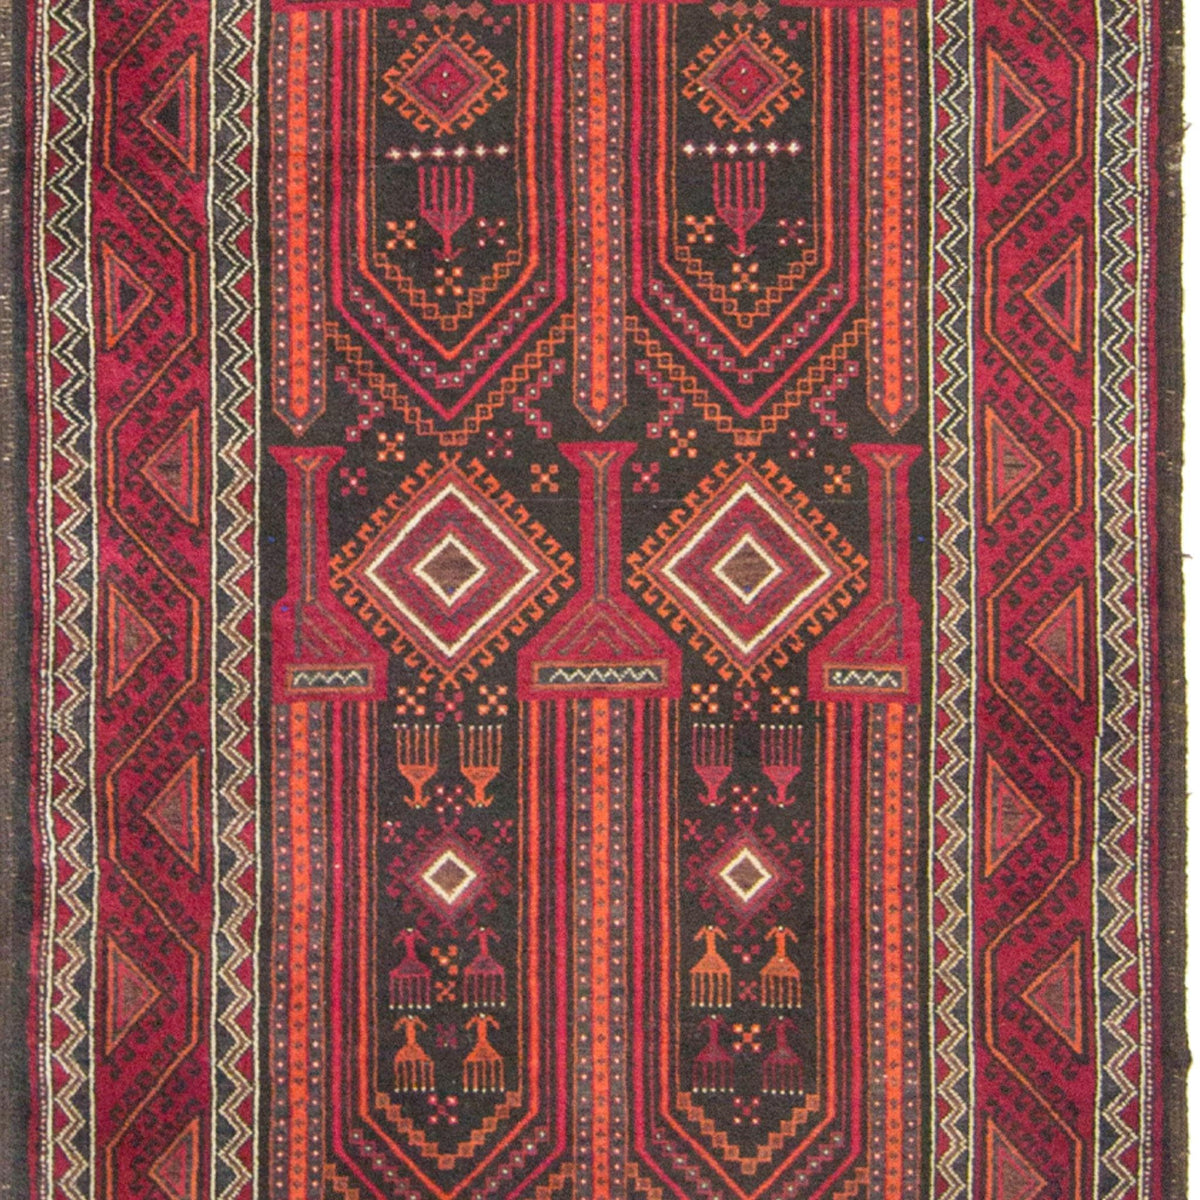 Fine Hand-knotted Persian Wool Baluchi Rug 121cm x 276cm